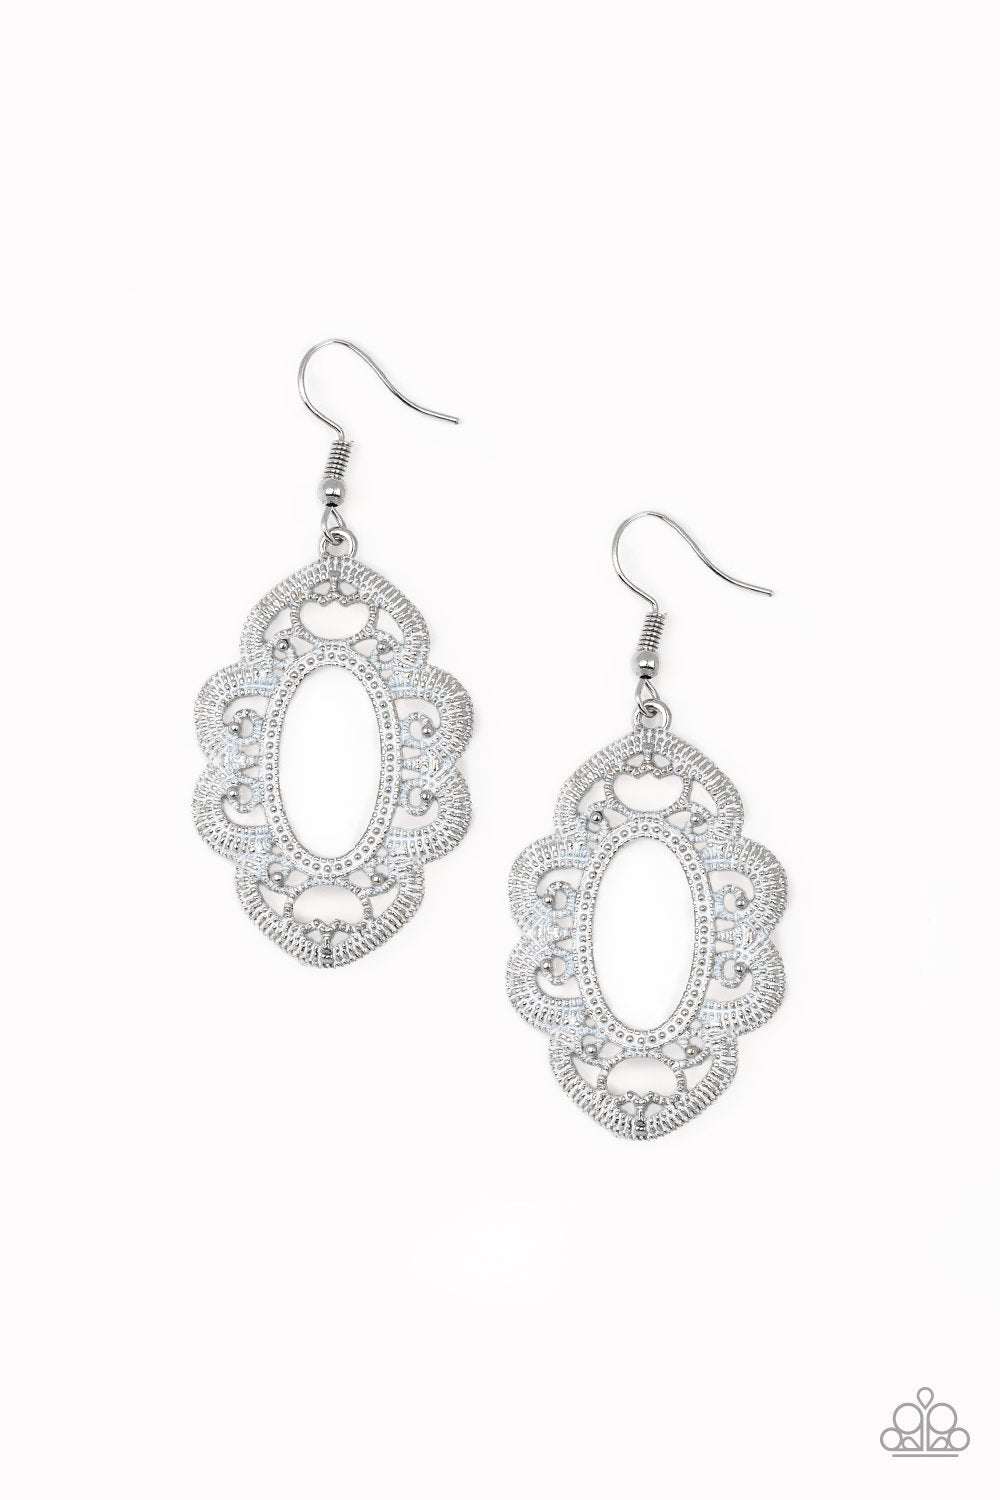 Mantras and Mandalas White Filigree Earrings - Paparazzi Accessories - lightbox -CarasShop.com - $5 Jewelry by Cara Jewels